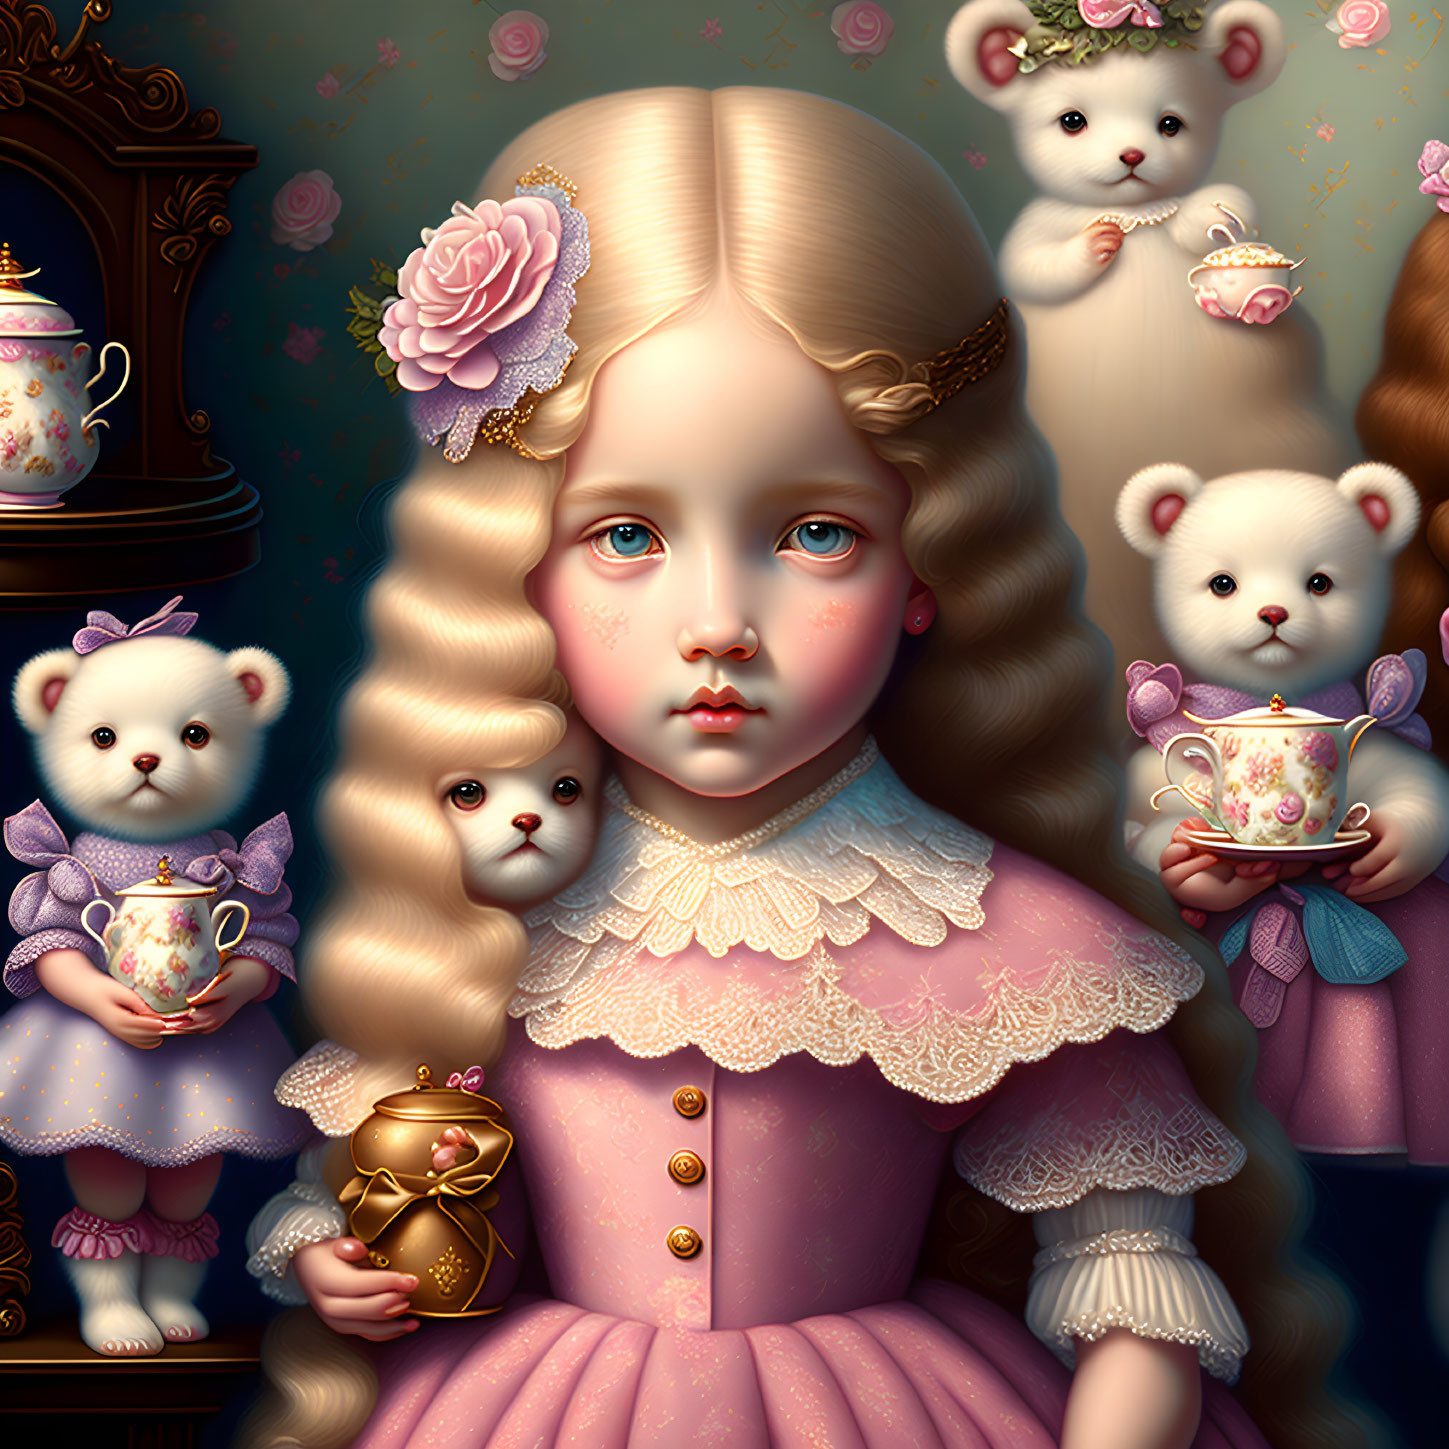 Victorian girl with anthropomorphic mice in vintage setting